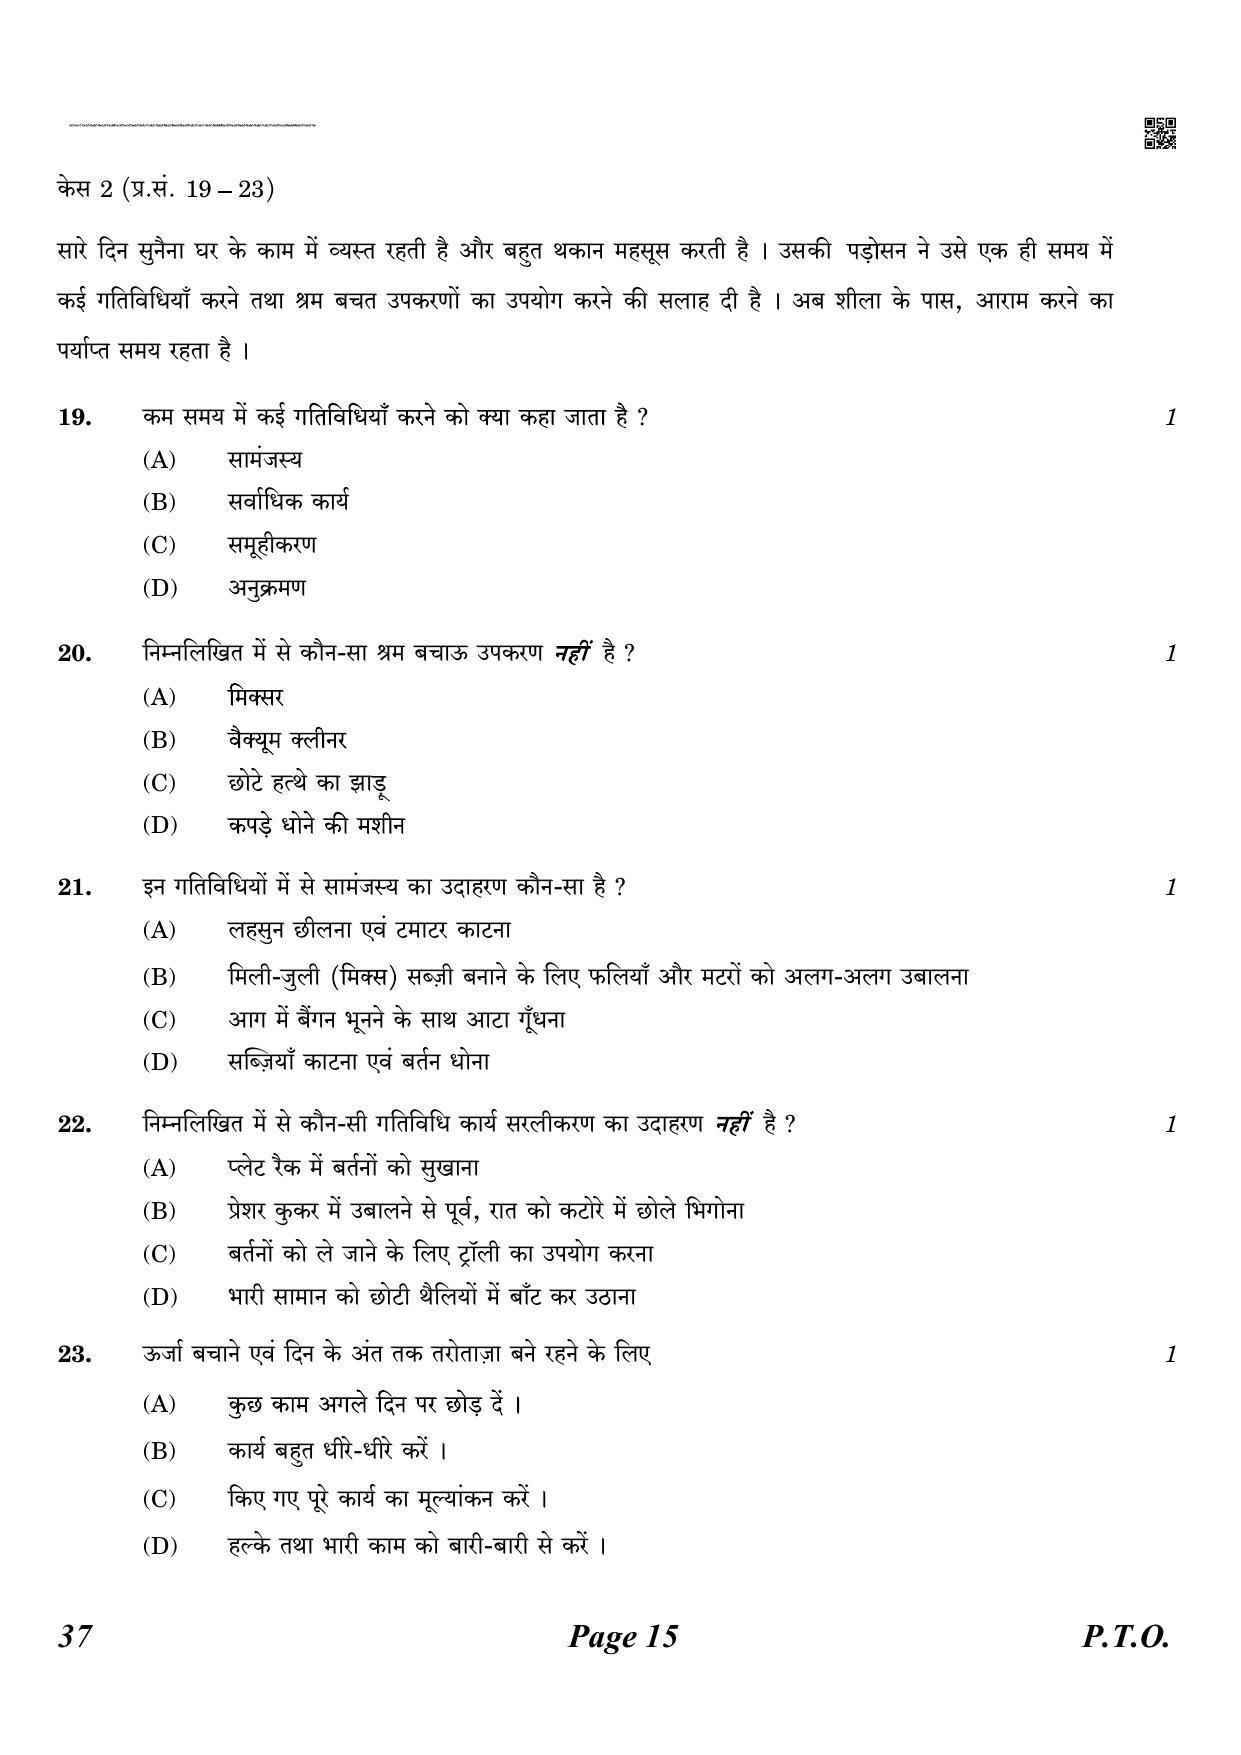 CBSE Class 10 QP_064_Home_Science 2021 Compartment Question Paper - Page 15